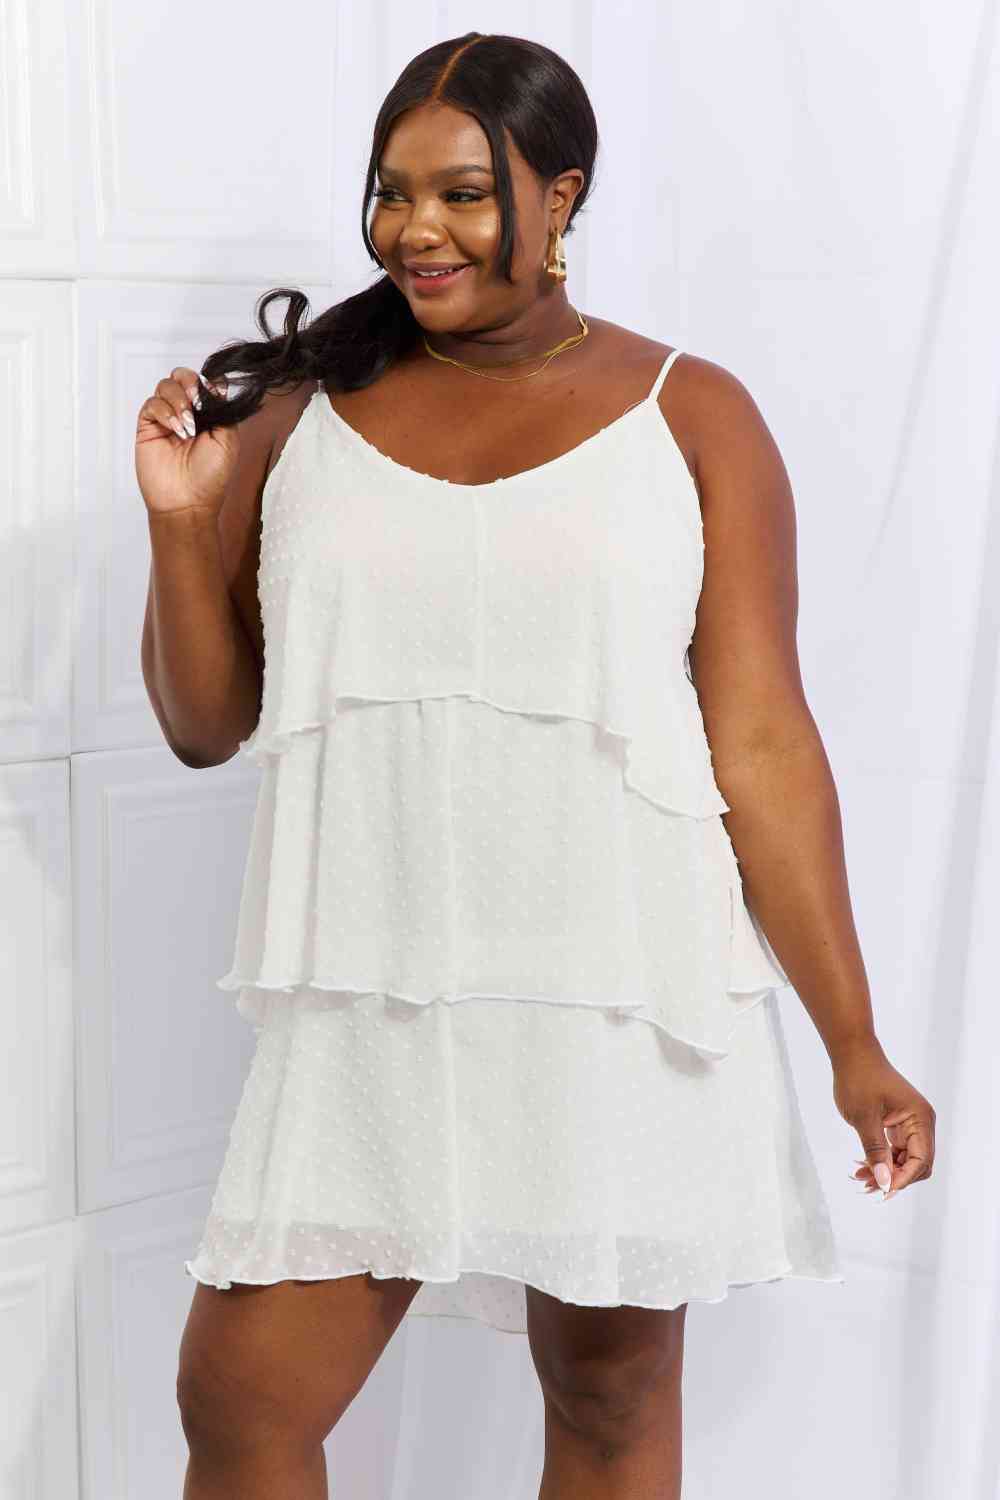 By The River Full Size Cascade Ruffle Style Cami Dress in Soft White